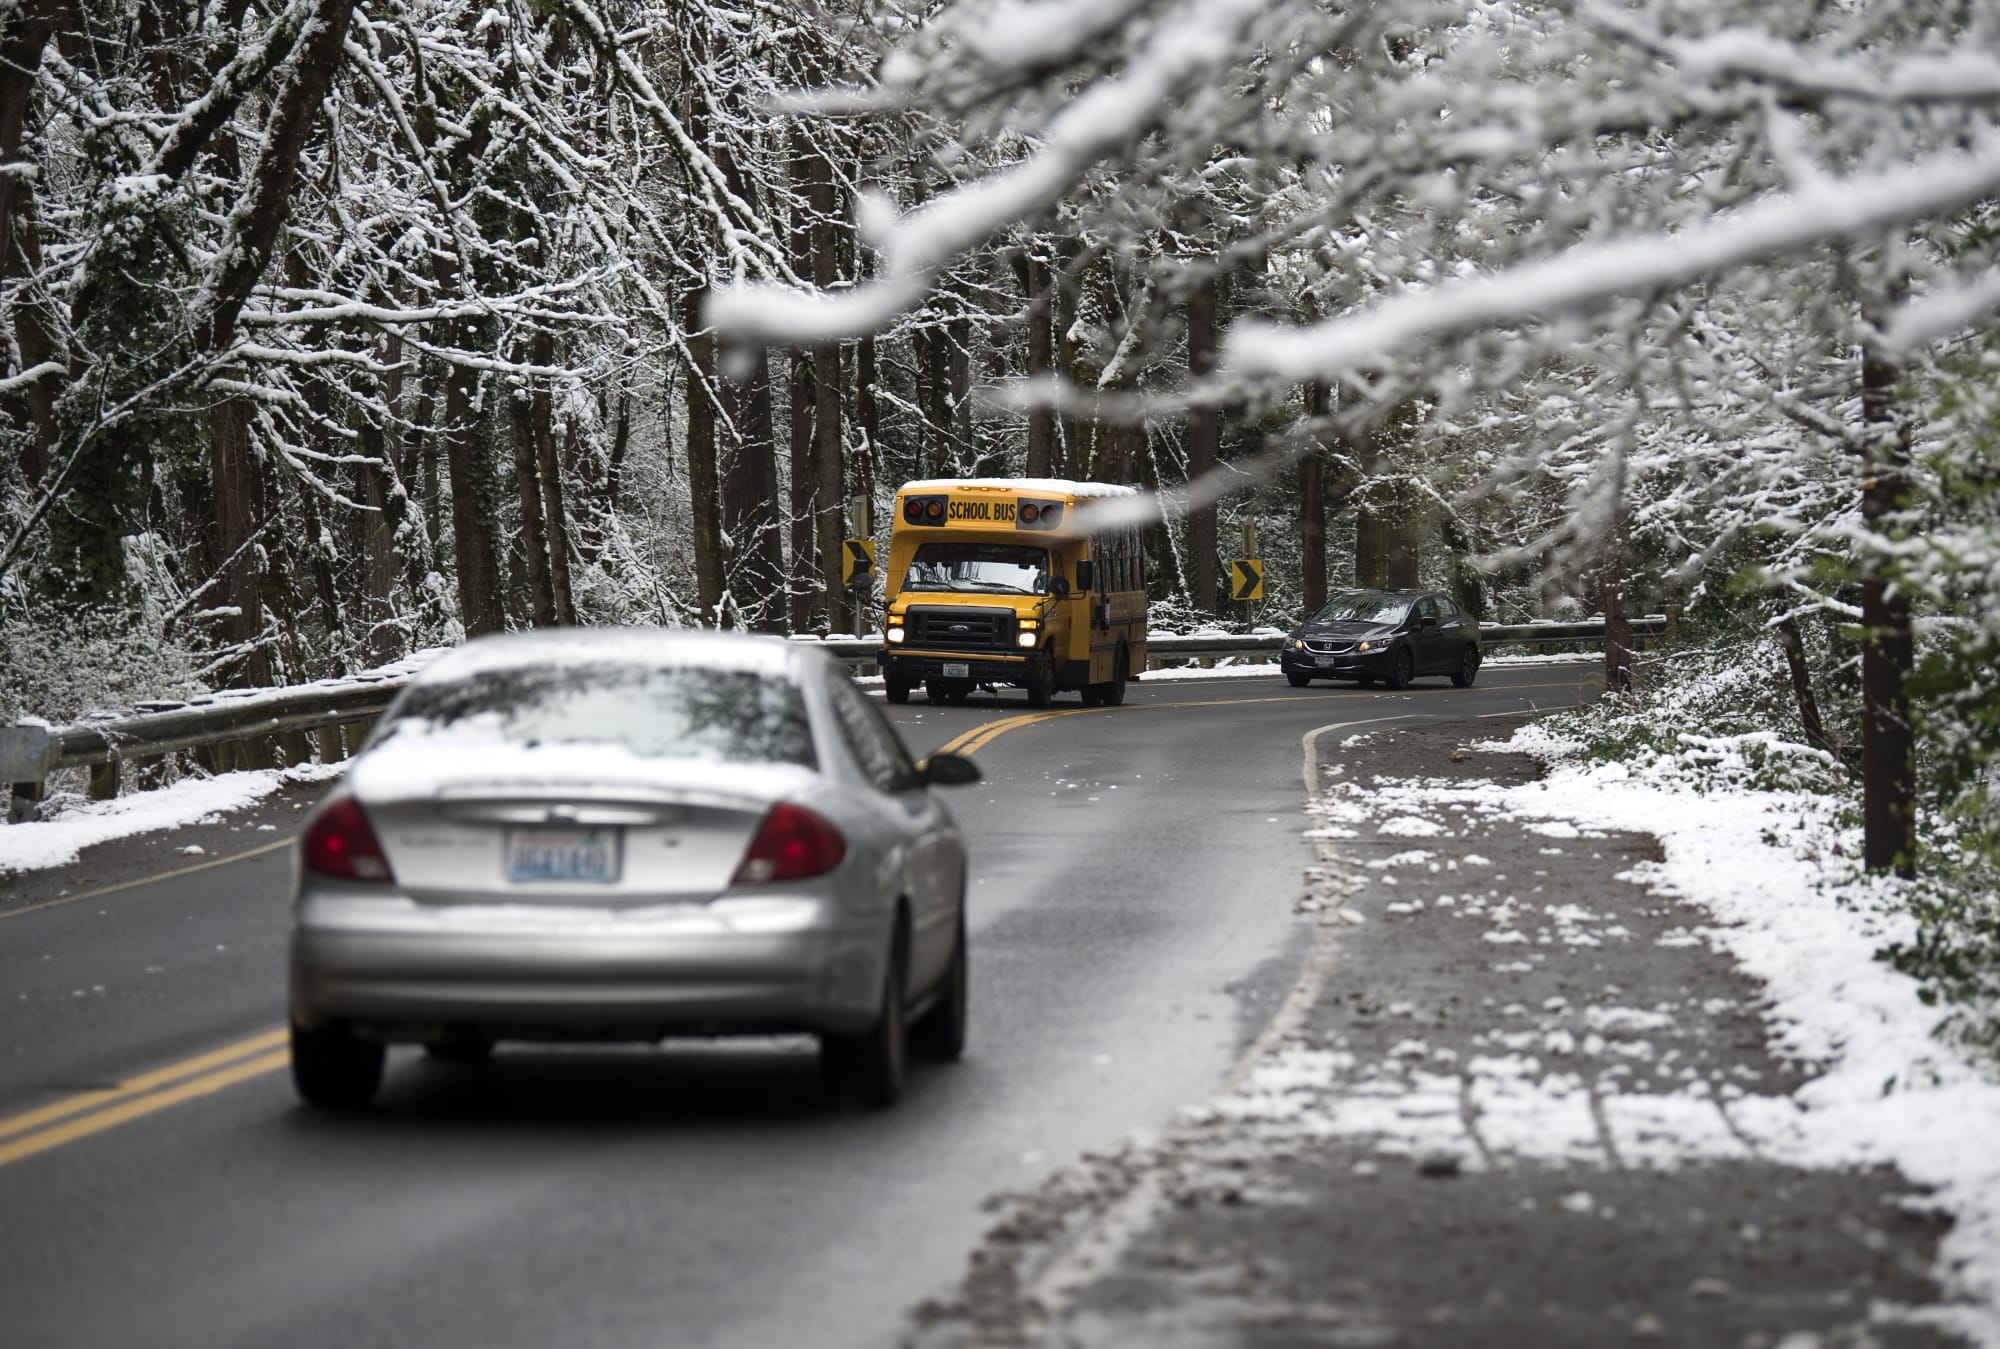 Many local schools operated with a late start on Thursday morning, but because temperatures lingered just above freezing the freeways and metro-area streets were mostly bare. Drivers are seen along Blandford Drive canyon from MacArthur Boulevard to Evergreen Boulevard late Thursday morning, Feb. 22, 2018, in Vancouver.